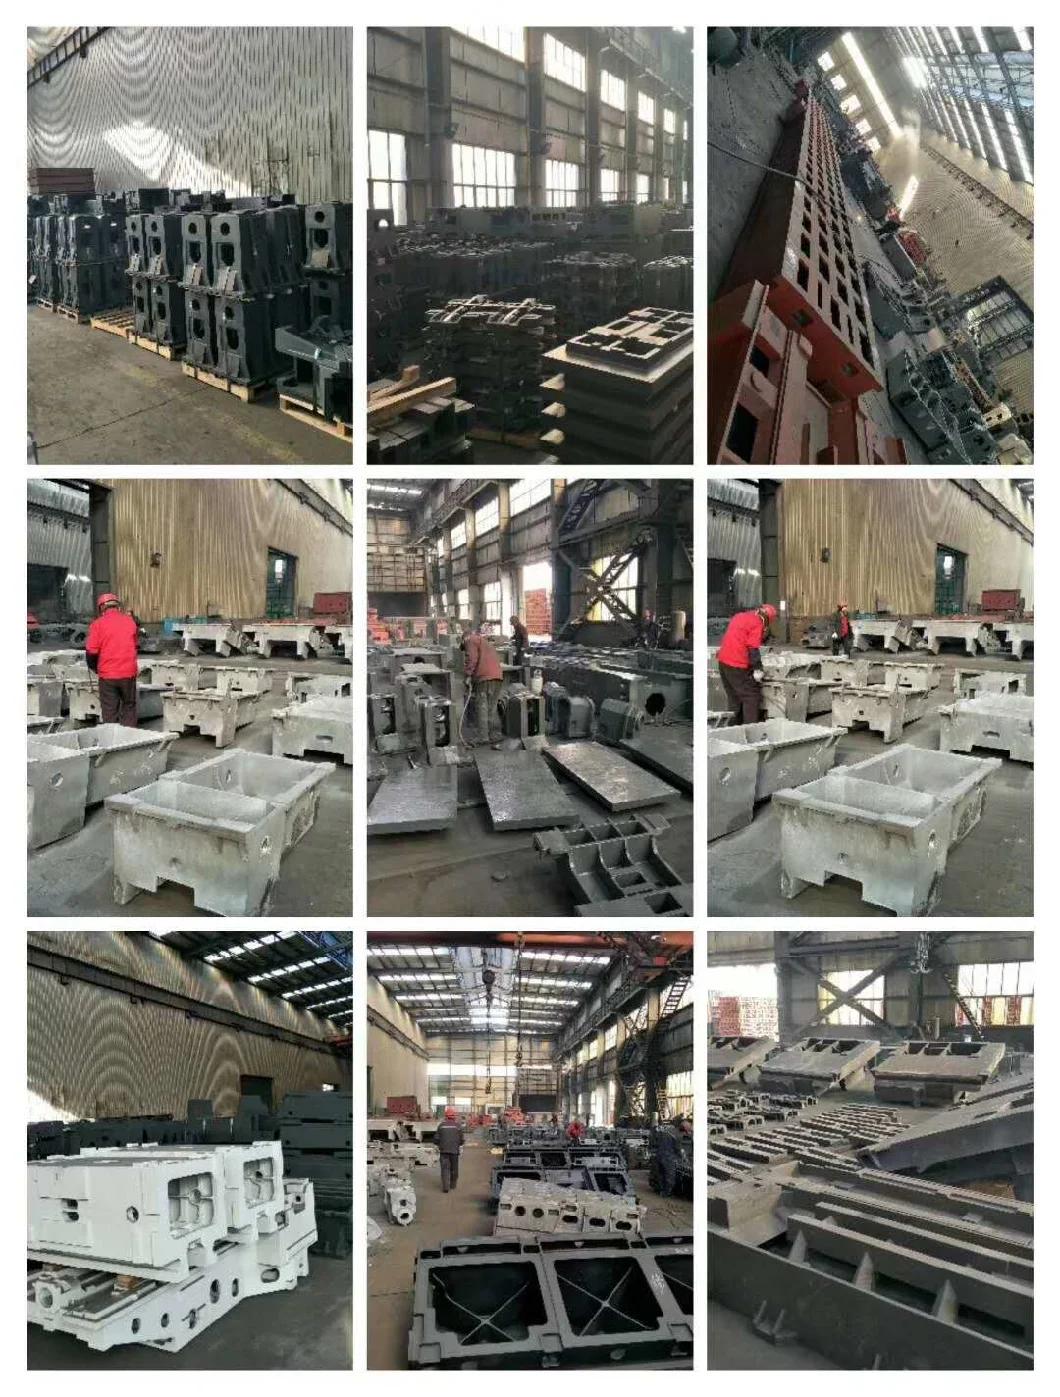 Large CNC Machine Tool Casting Frame Gray Cast Iron From China Casting Foundry